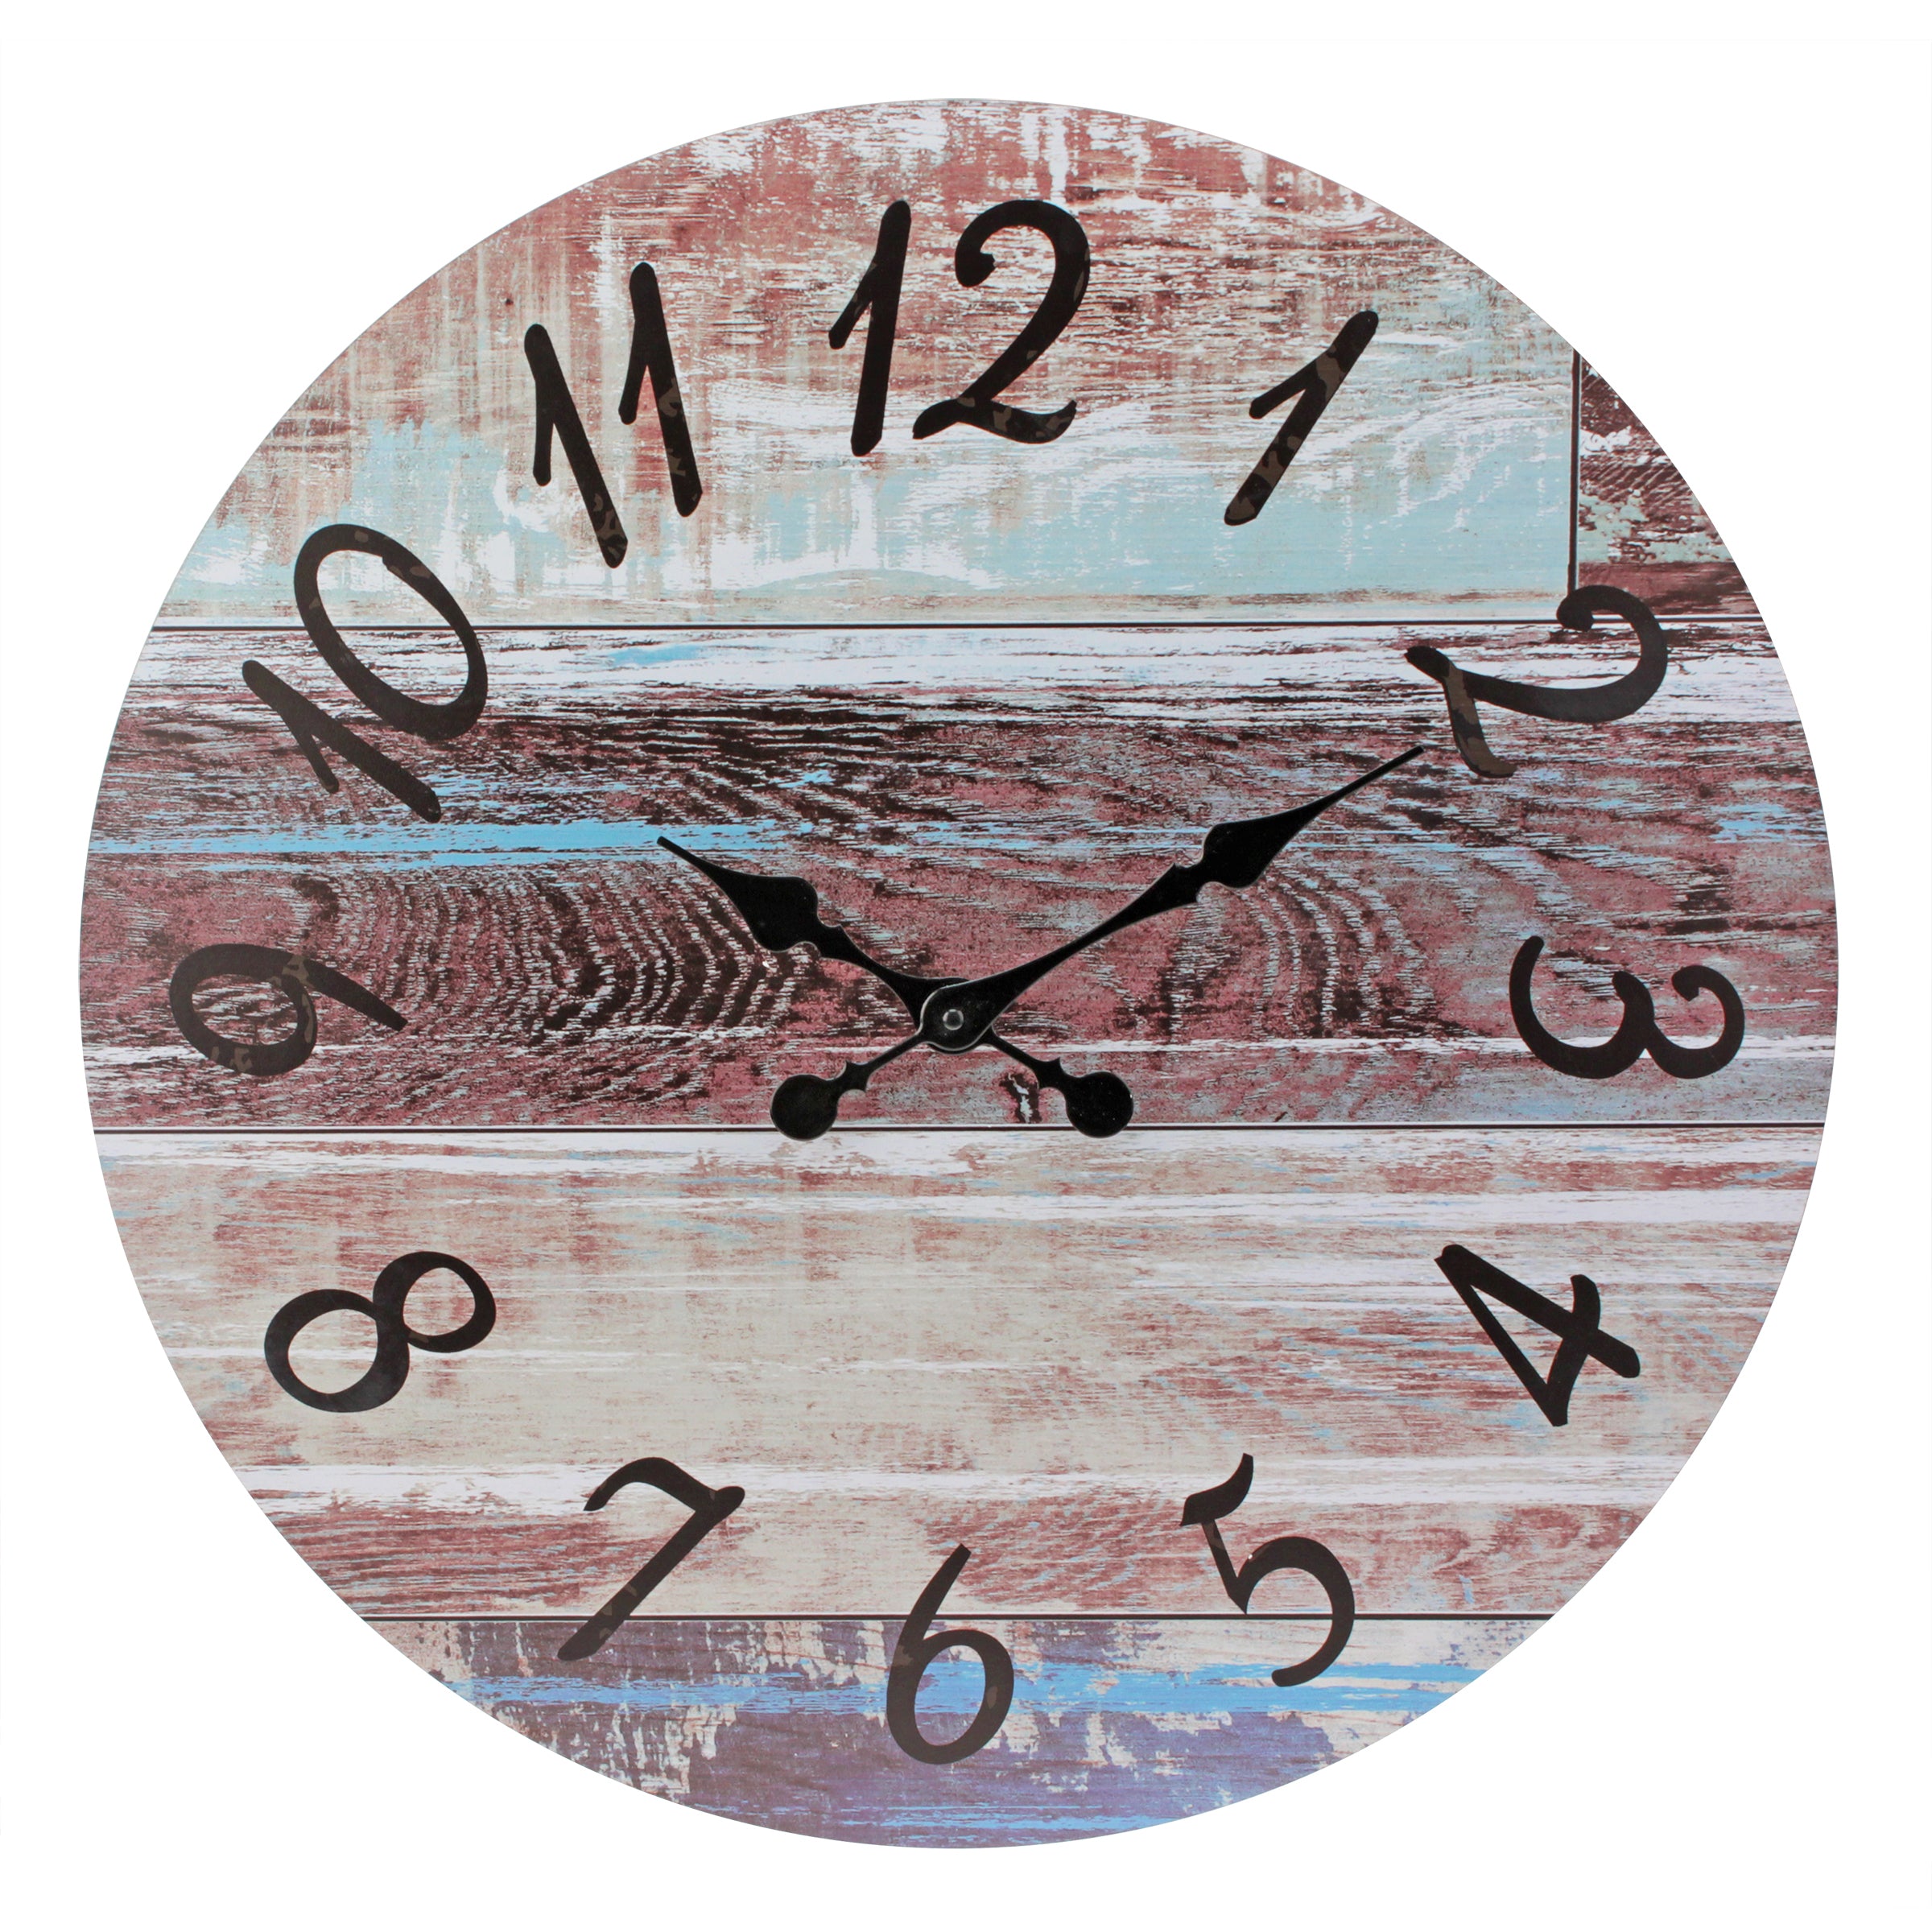 23.6” Round Rustic Wall Clock (WS)